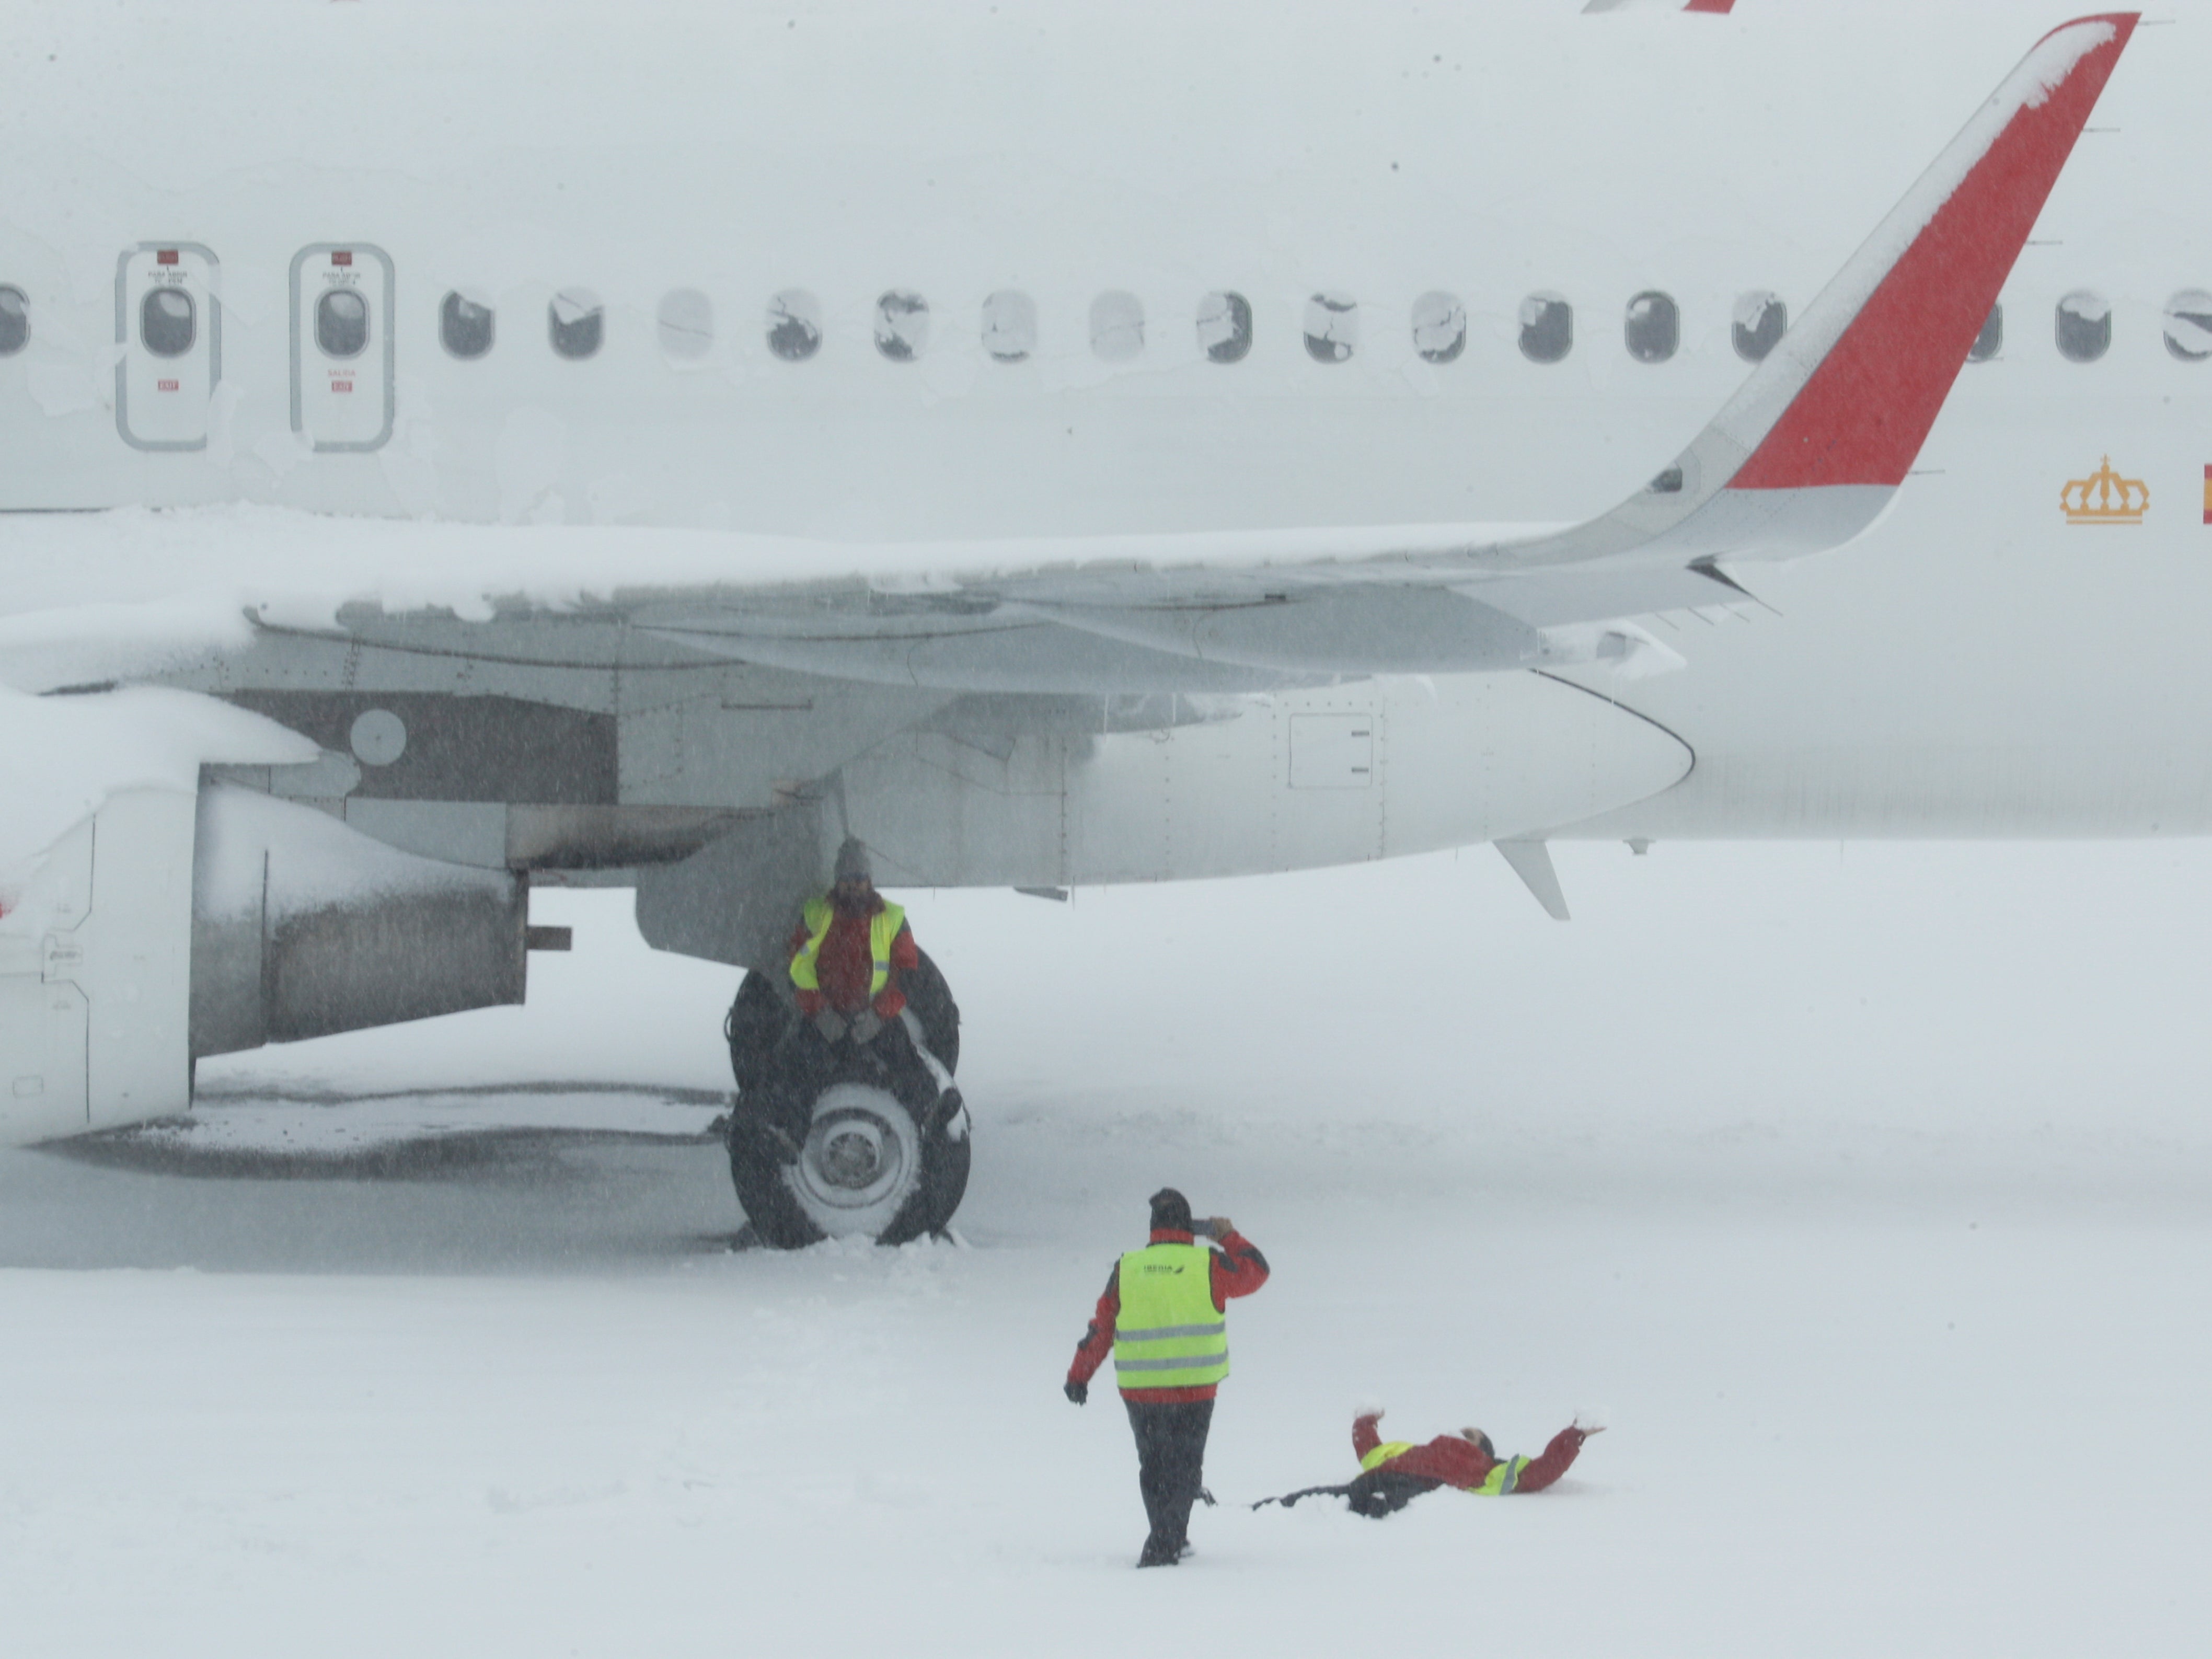 An airport worker sits on the wheel of a parked snow-covered plane as one of his colleague takes a picture of another coworker lying on the snow at Adolfo Suarez Barajas airport, which is suspending flights due to heavy snowfall in Madrid